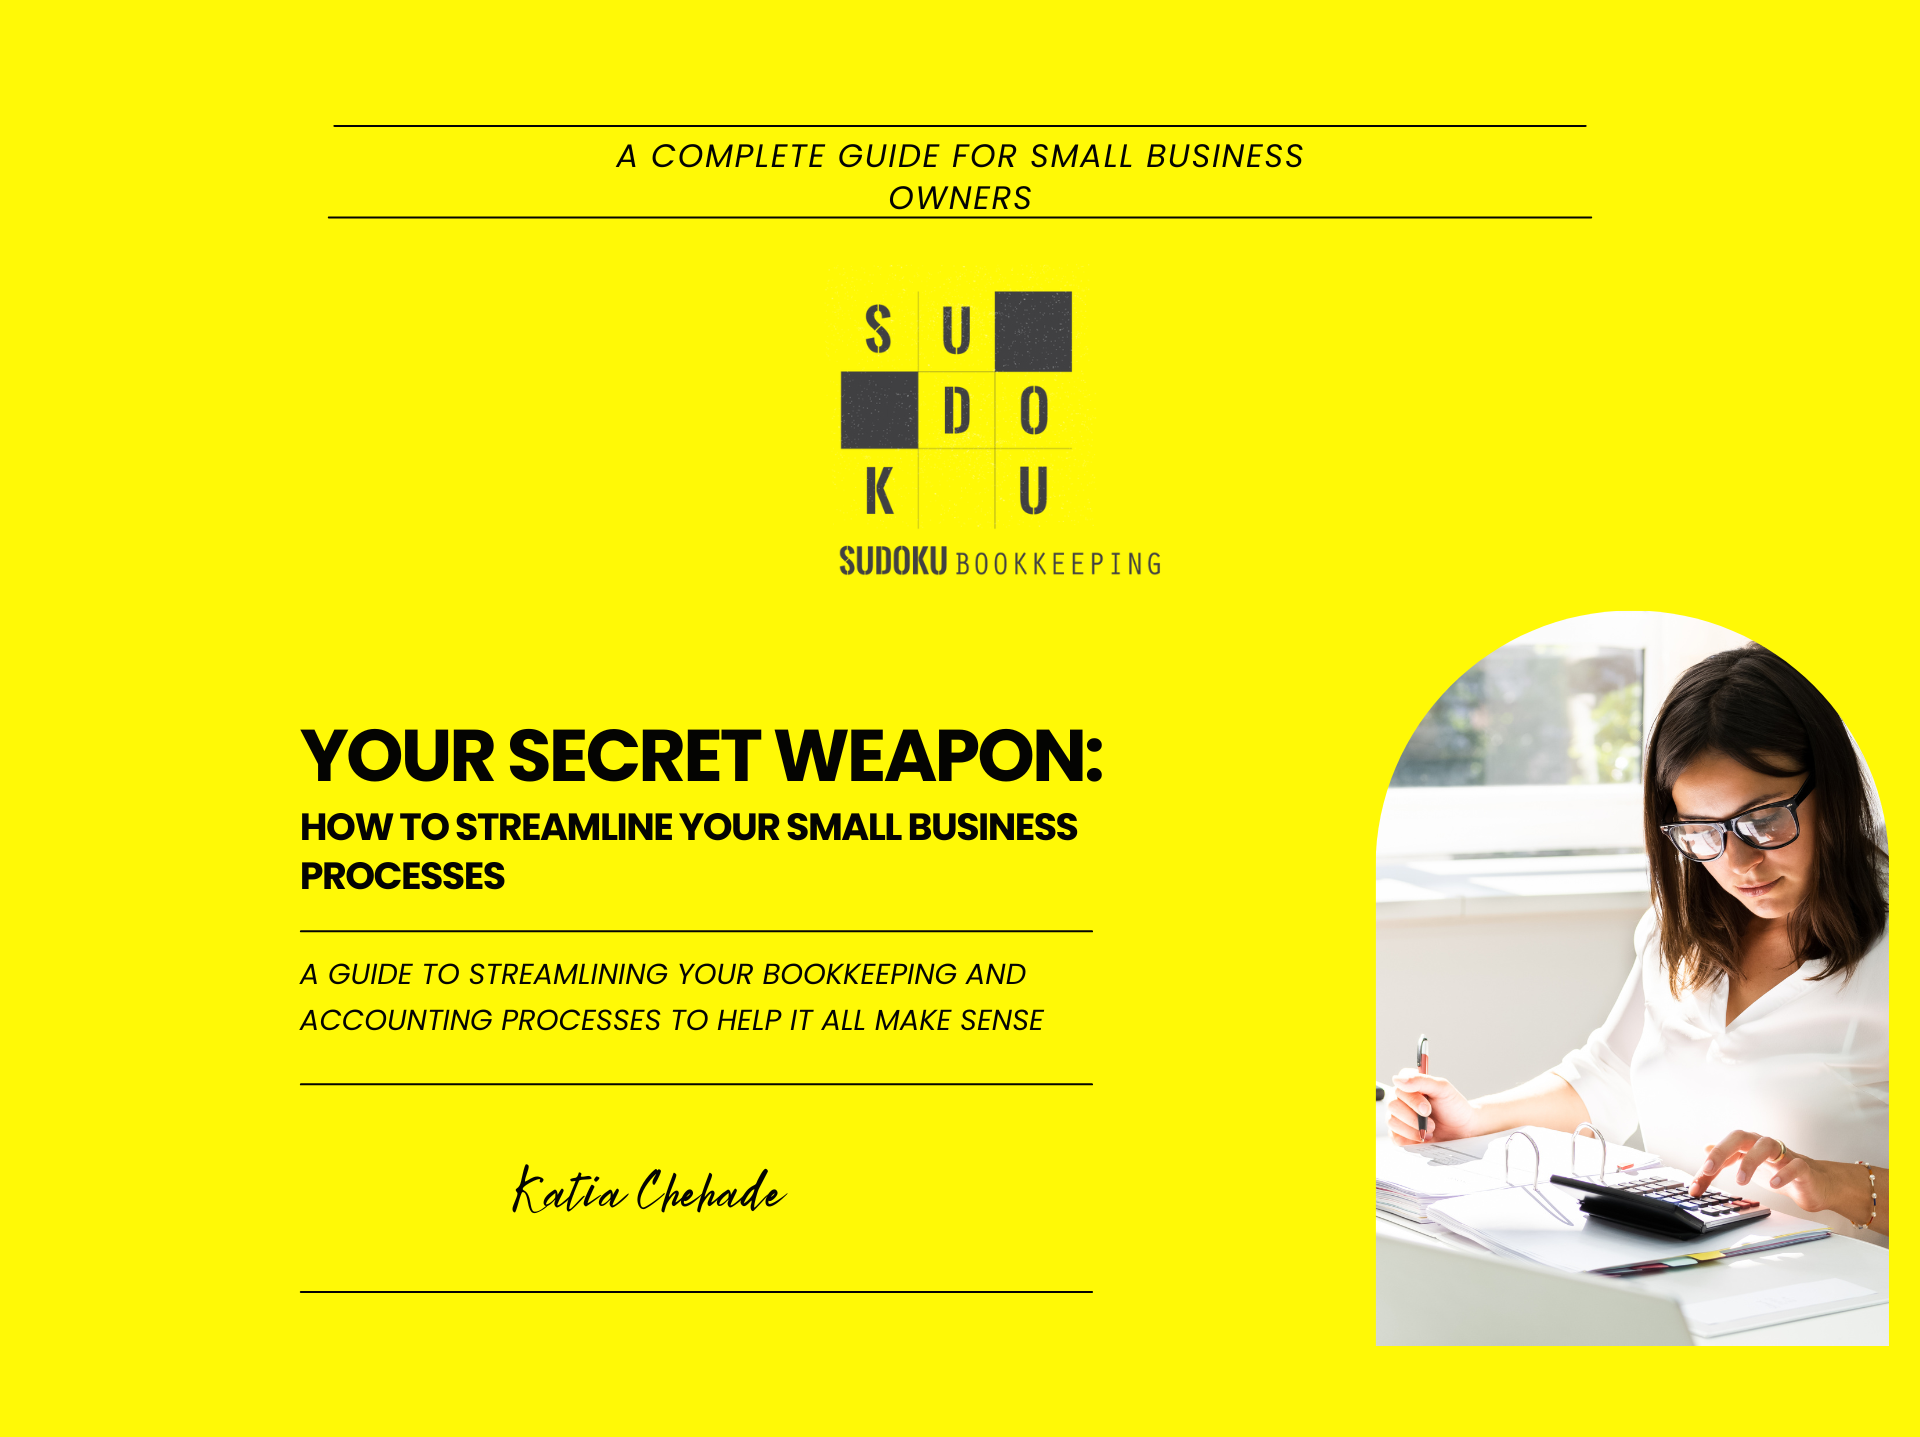 Your secret weapon: how to streamline your small business processes